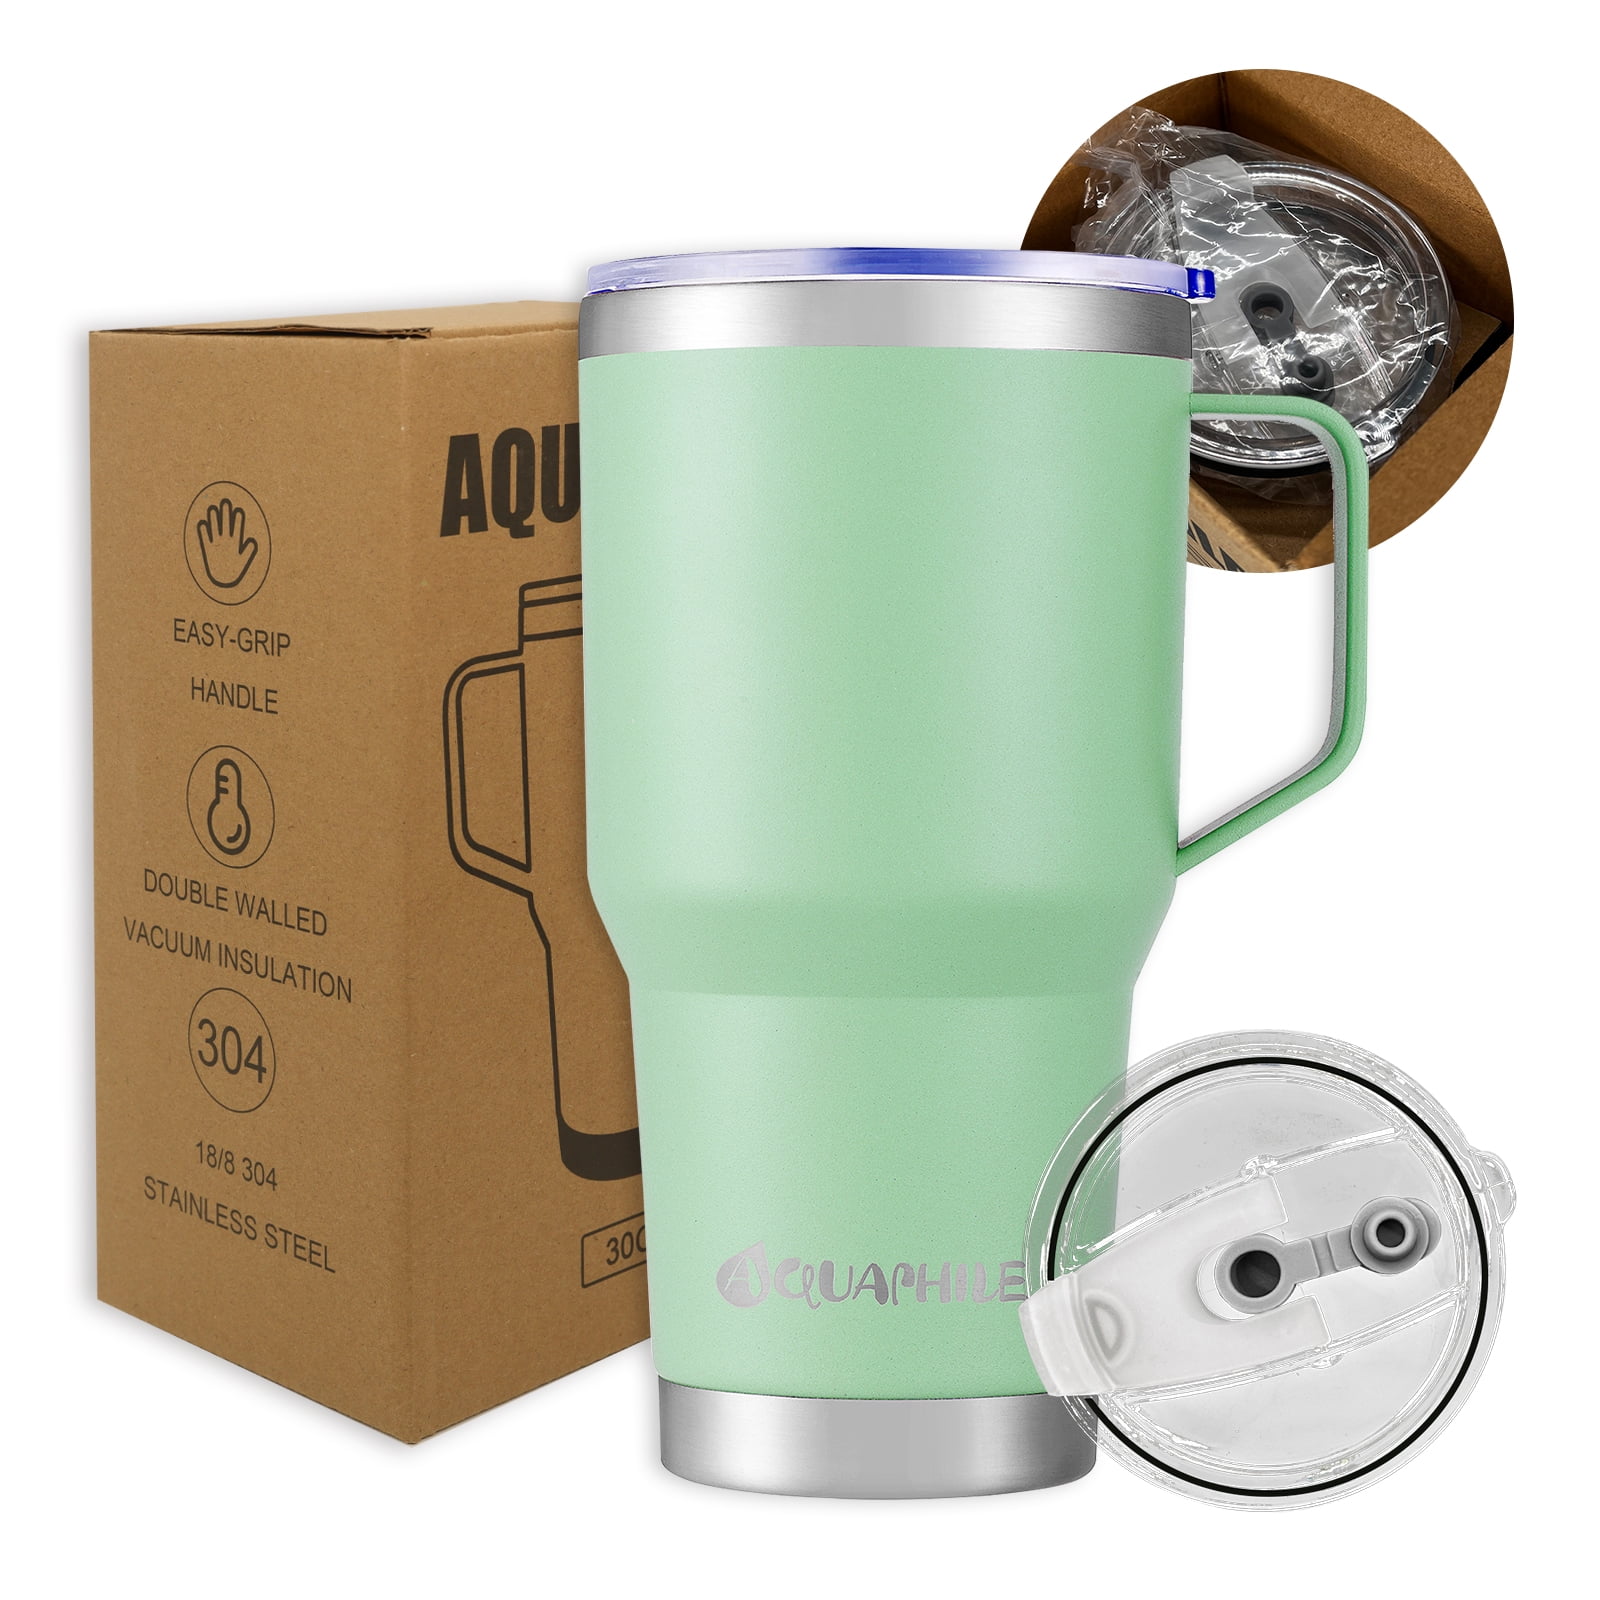 Bluwing 30 oz Tumbler with Handle-Travel Coffee Mug with Spill Proof Lid,  Double Wall Vacuum Insulat…See more Bluwing 30 oz Tumbler with  Handle-Travel